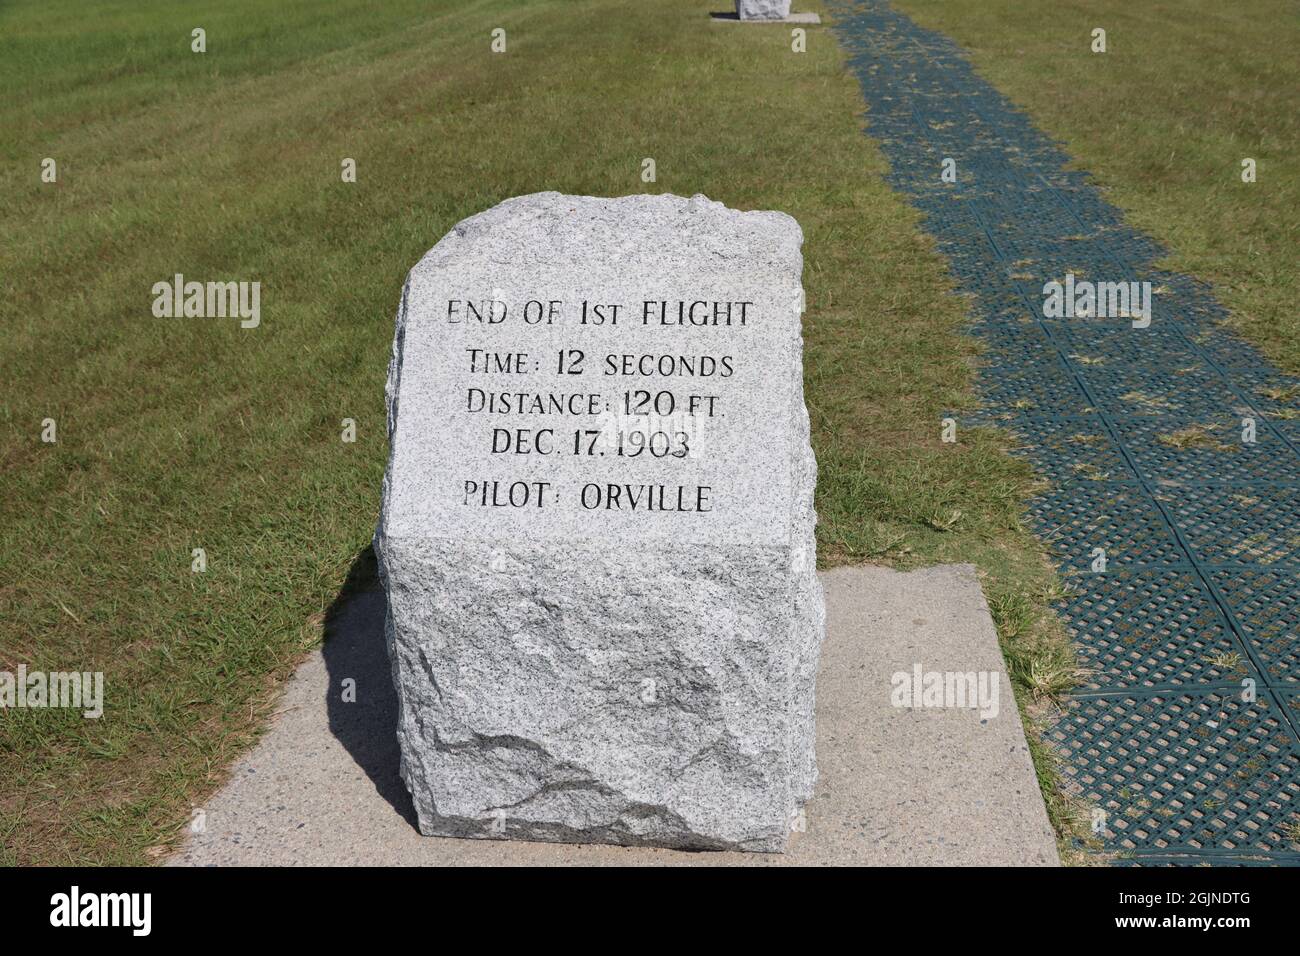 Stone Markers showing landing spot of the first flight by Wright brothers on 17 December 1903 Stock Photo